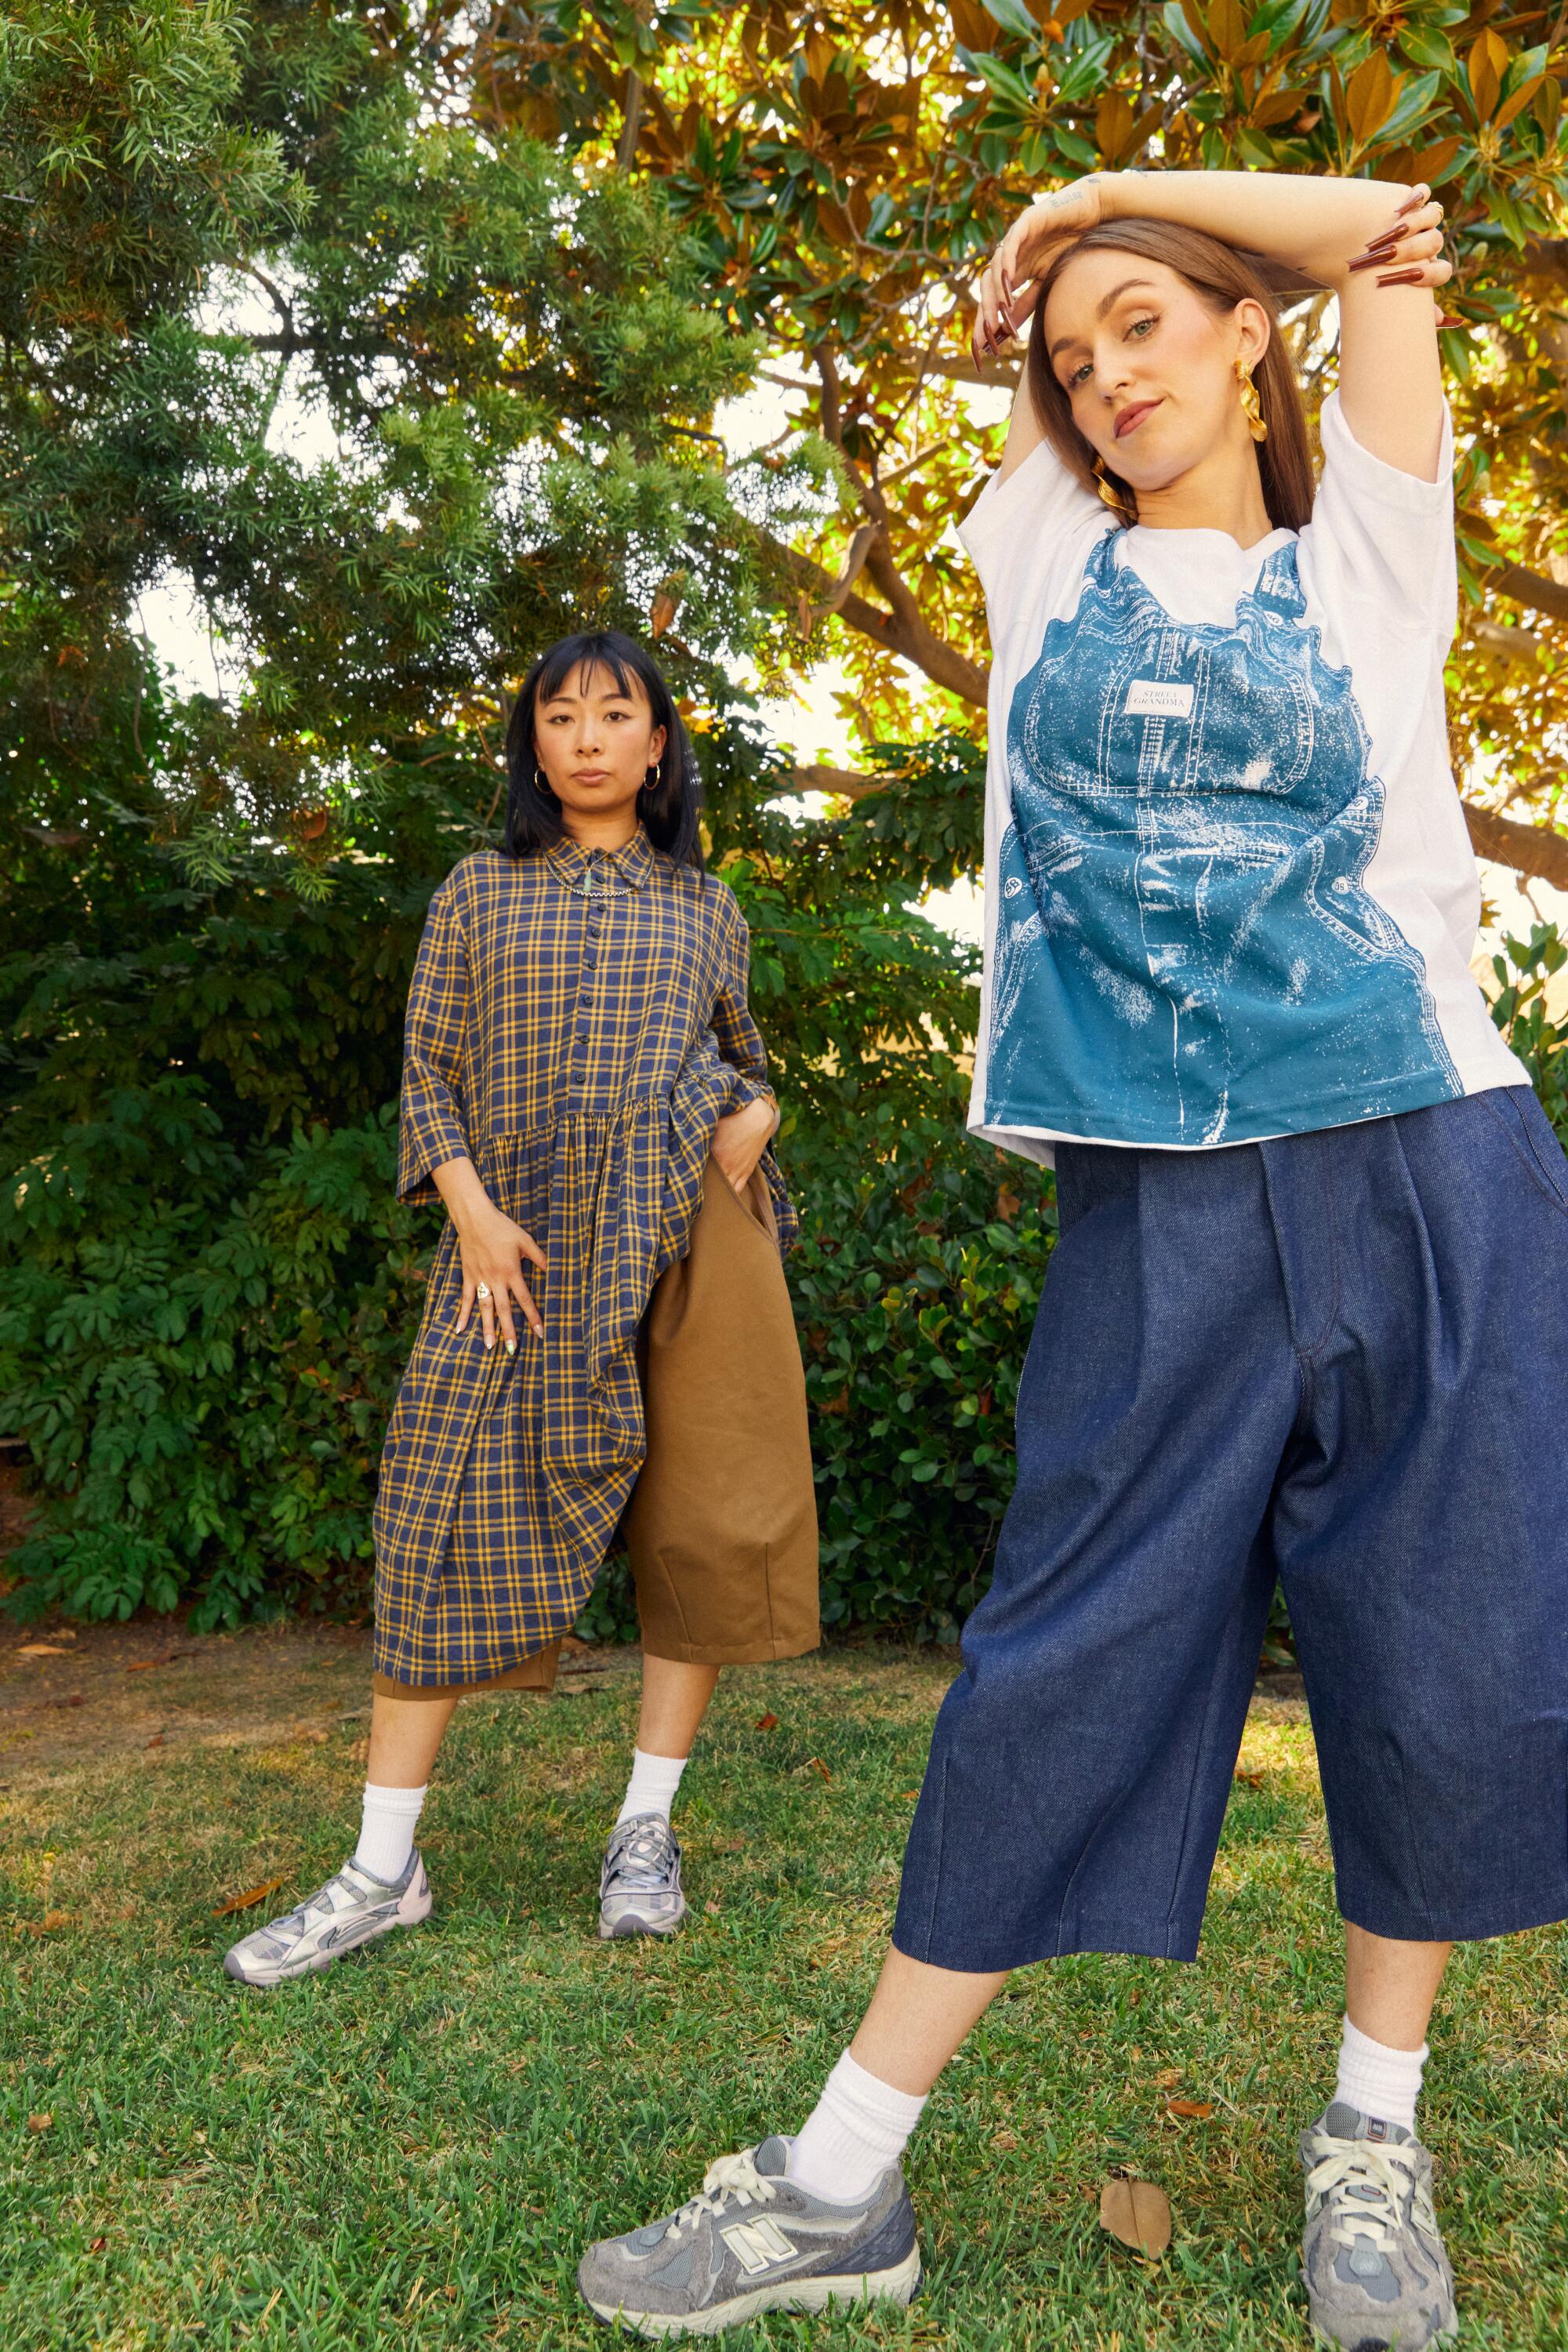 For Street Grandma, baggy fashion is a lifestyle, not a trend